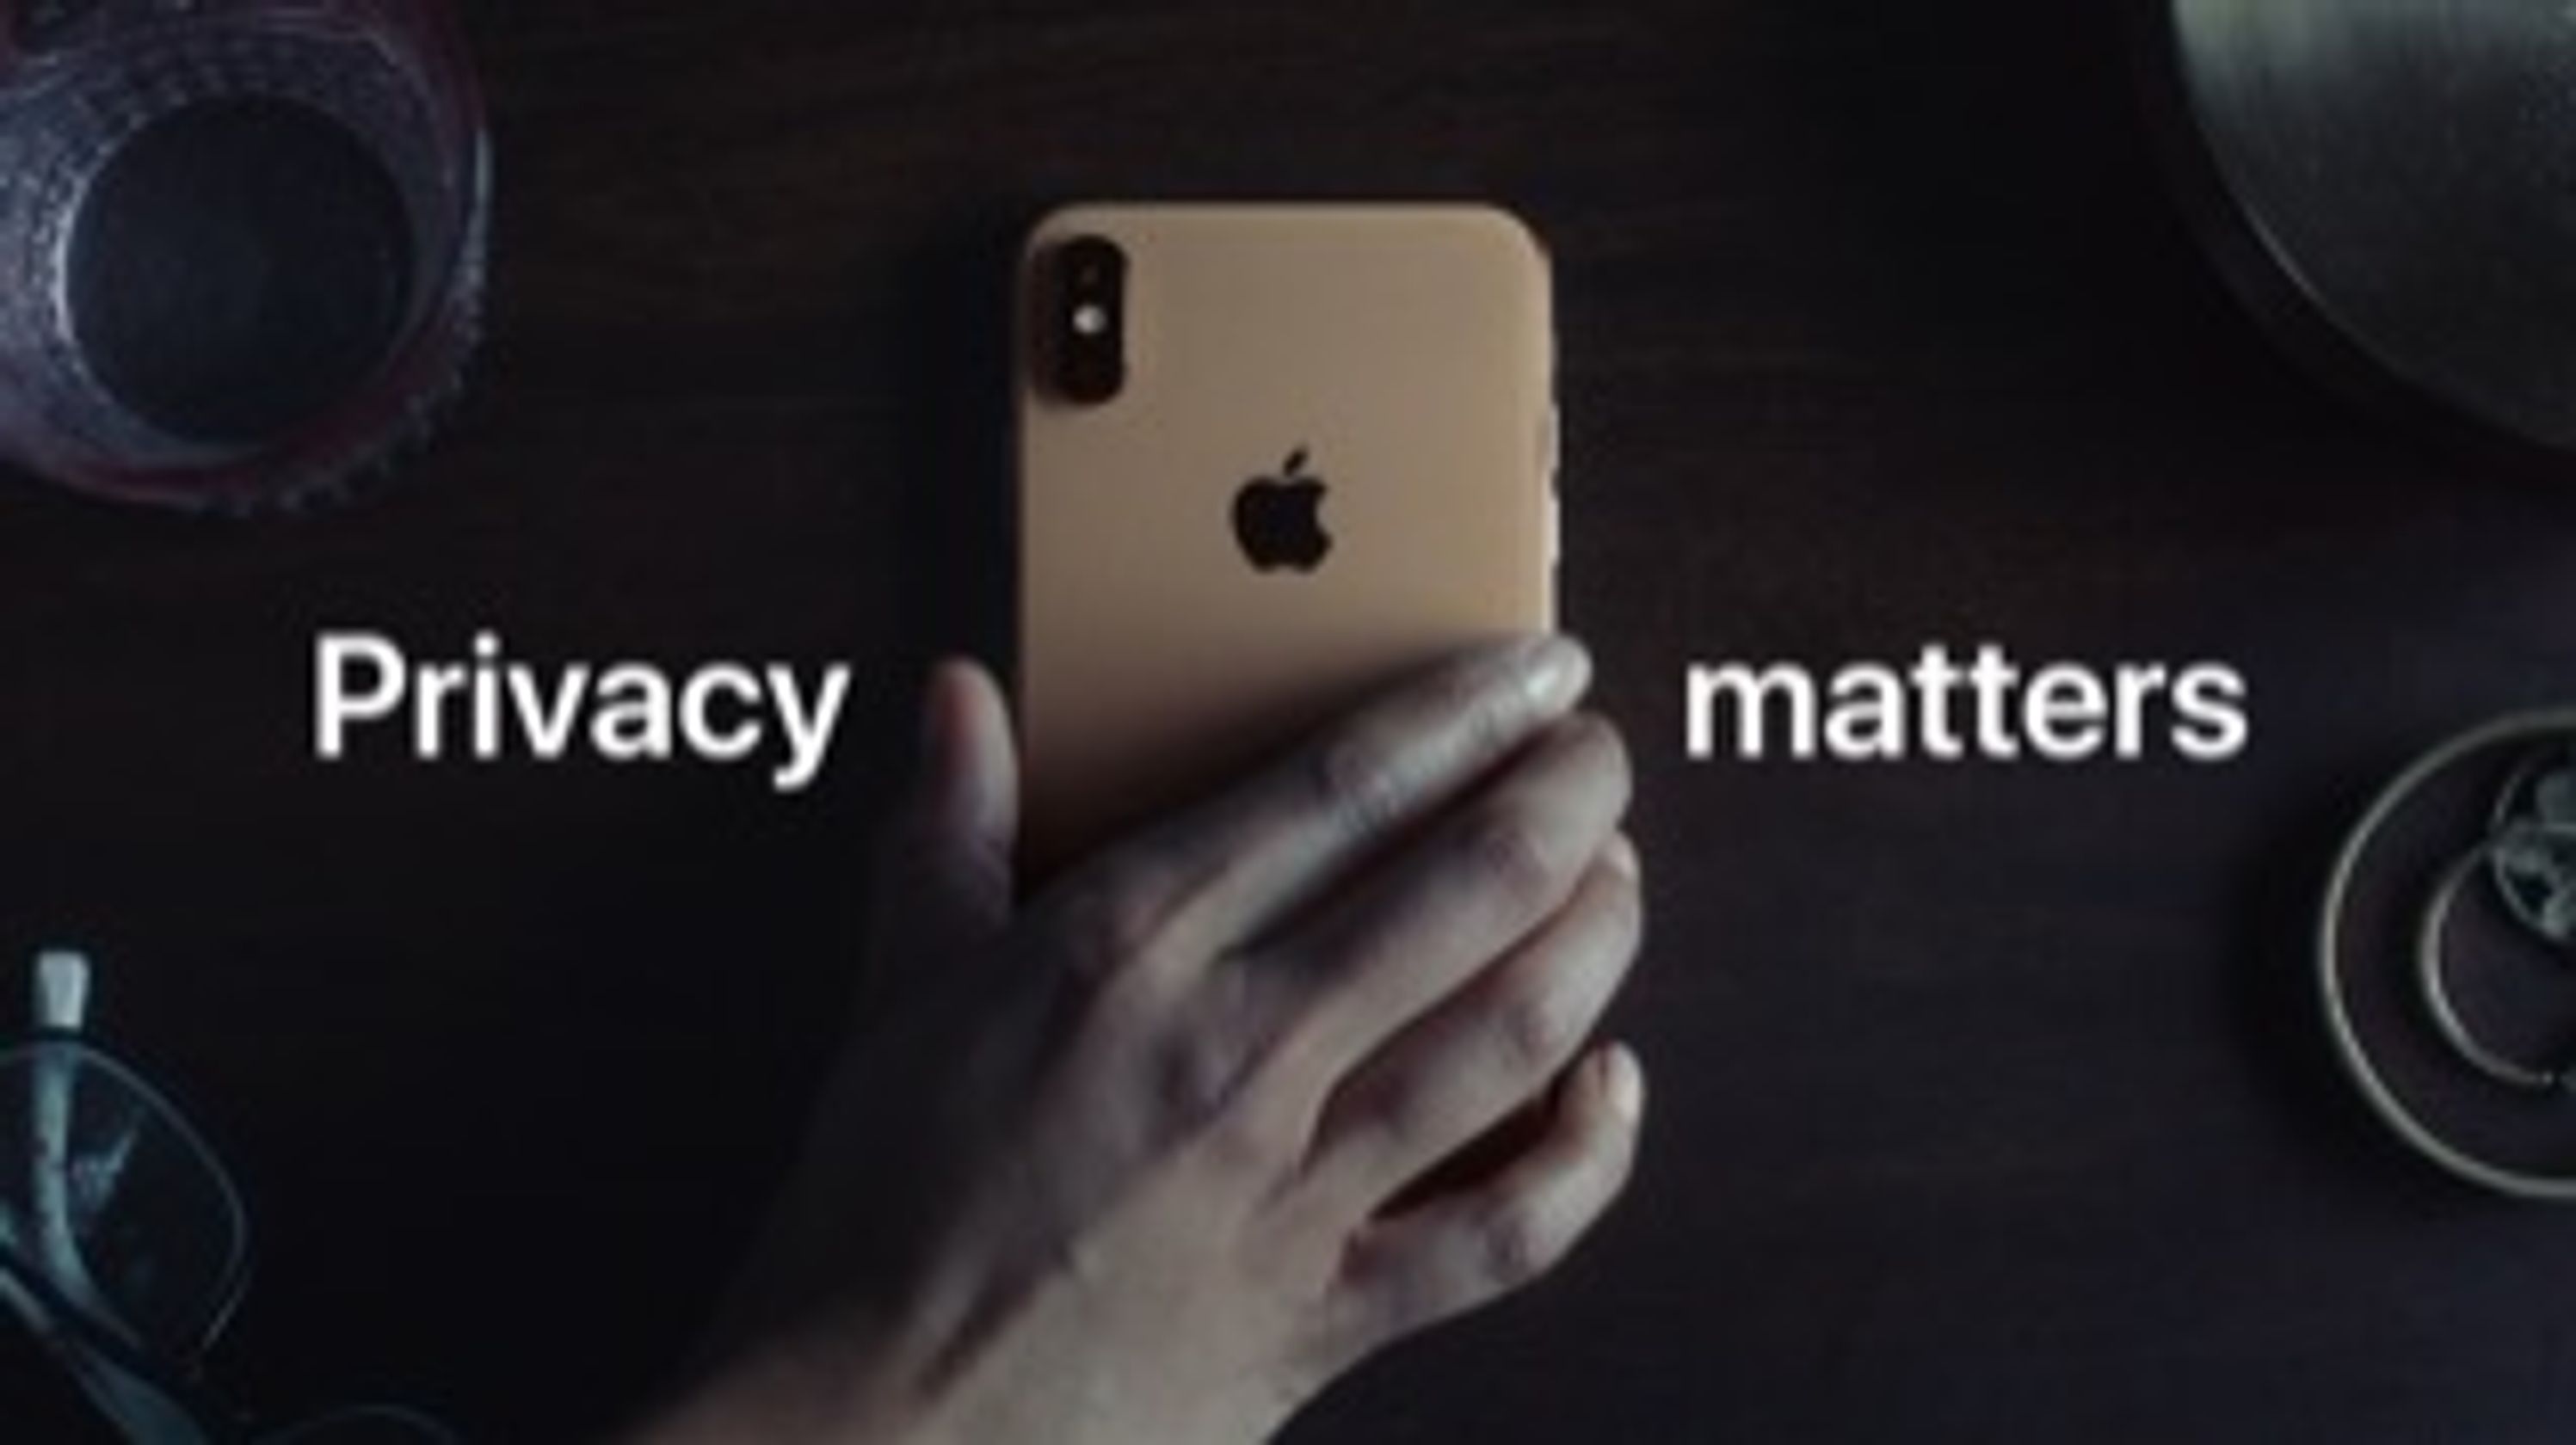 Apple’s new privacy advertisement is certainly going to bother Facebook and Google